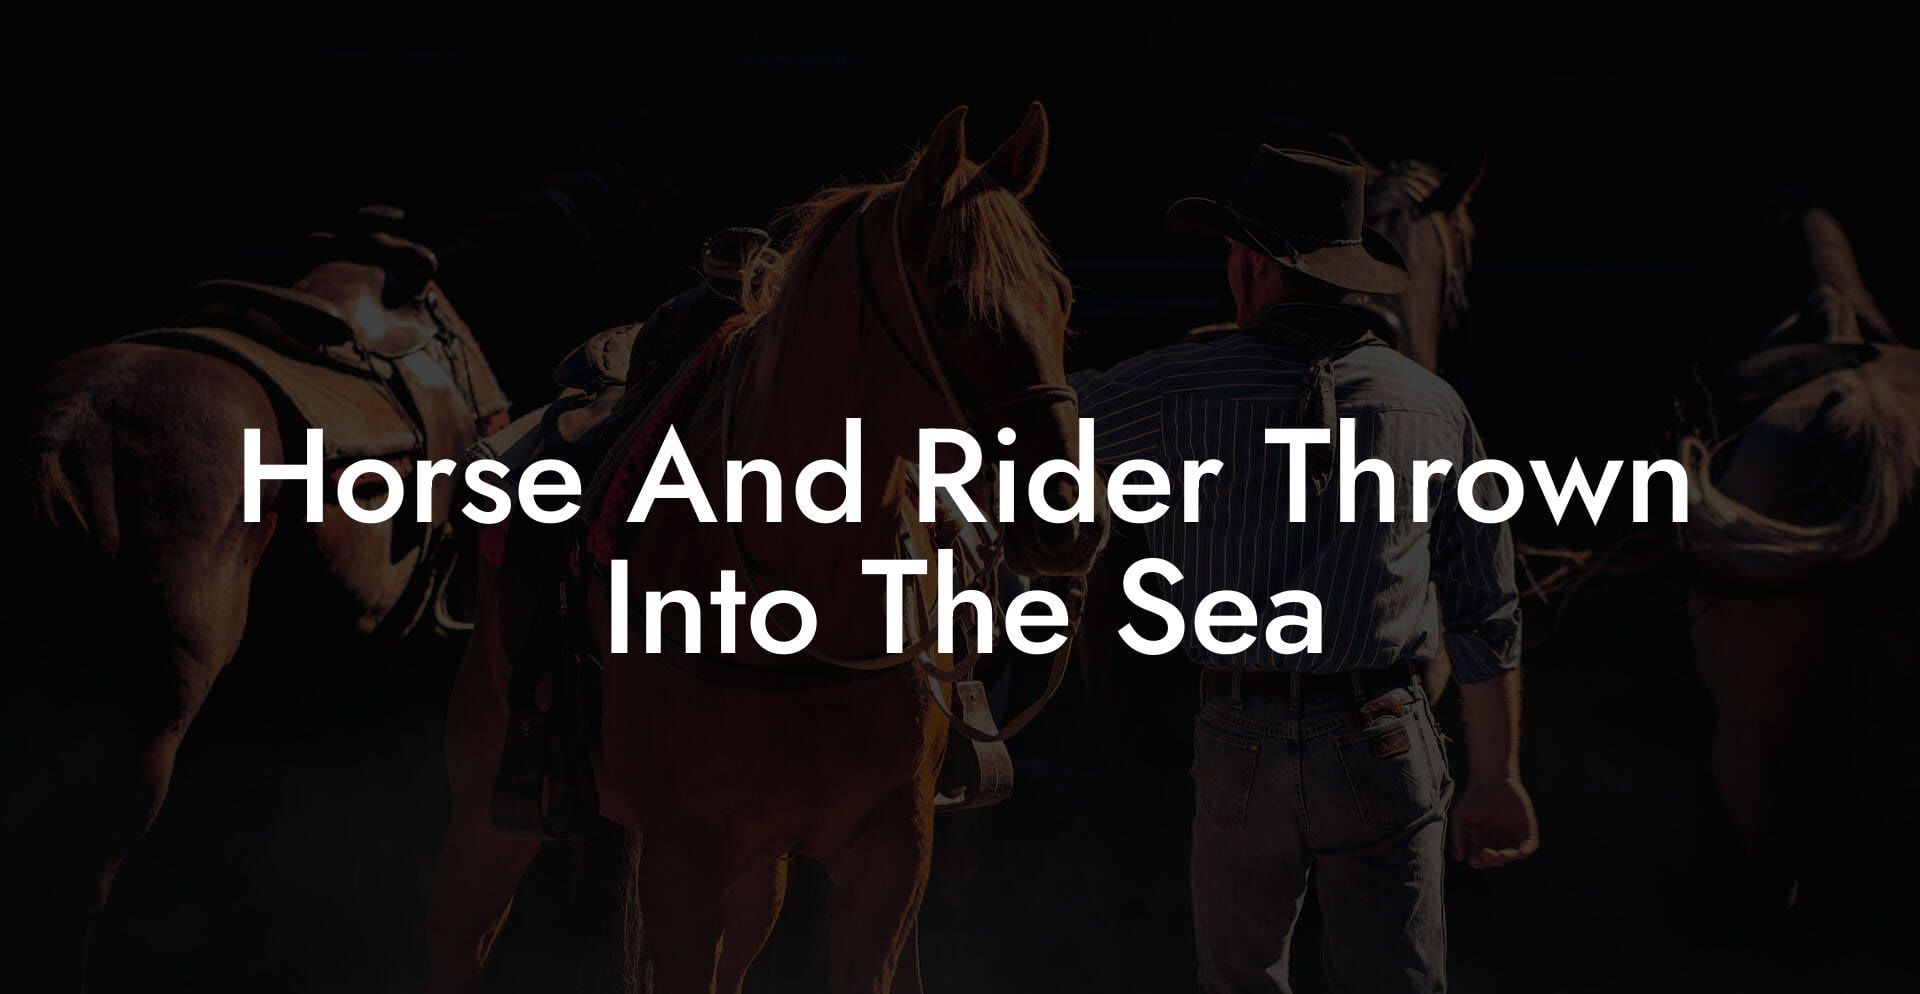 Horse And Rider Thrown Into The Sea